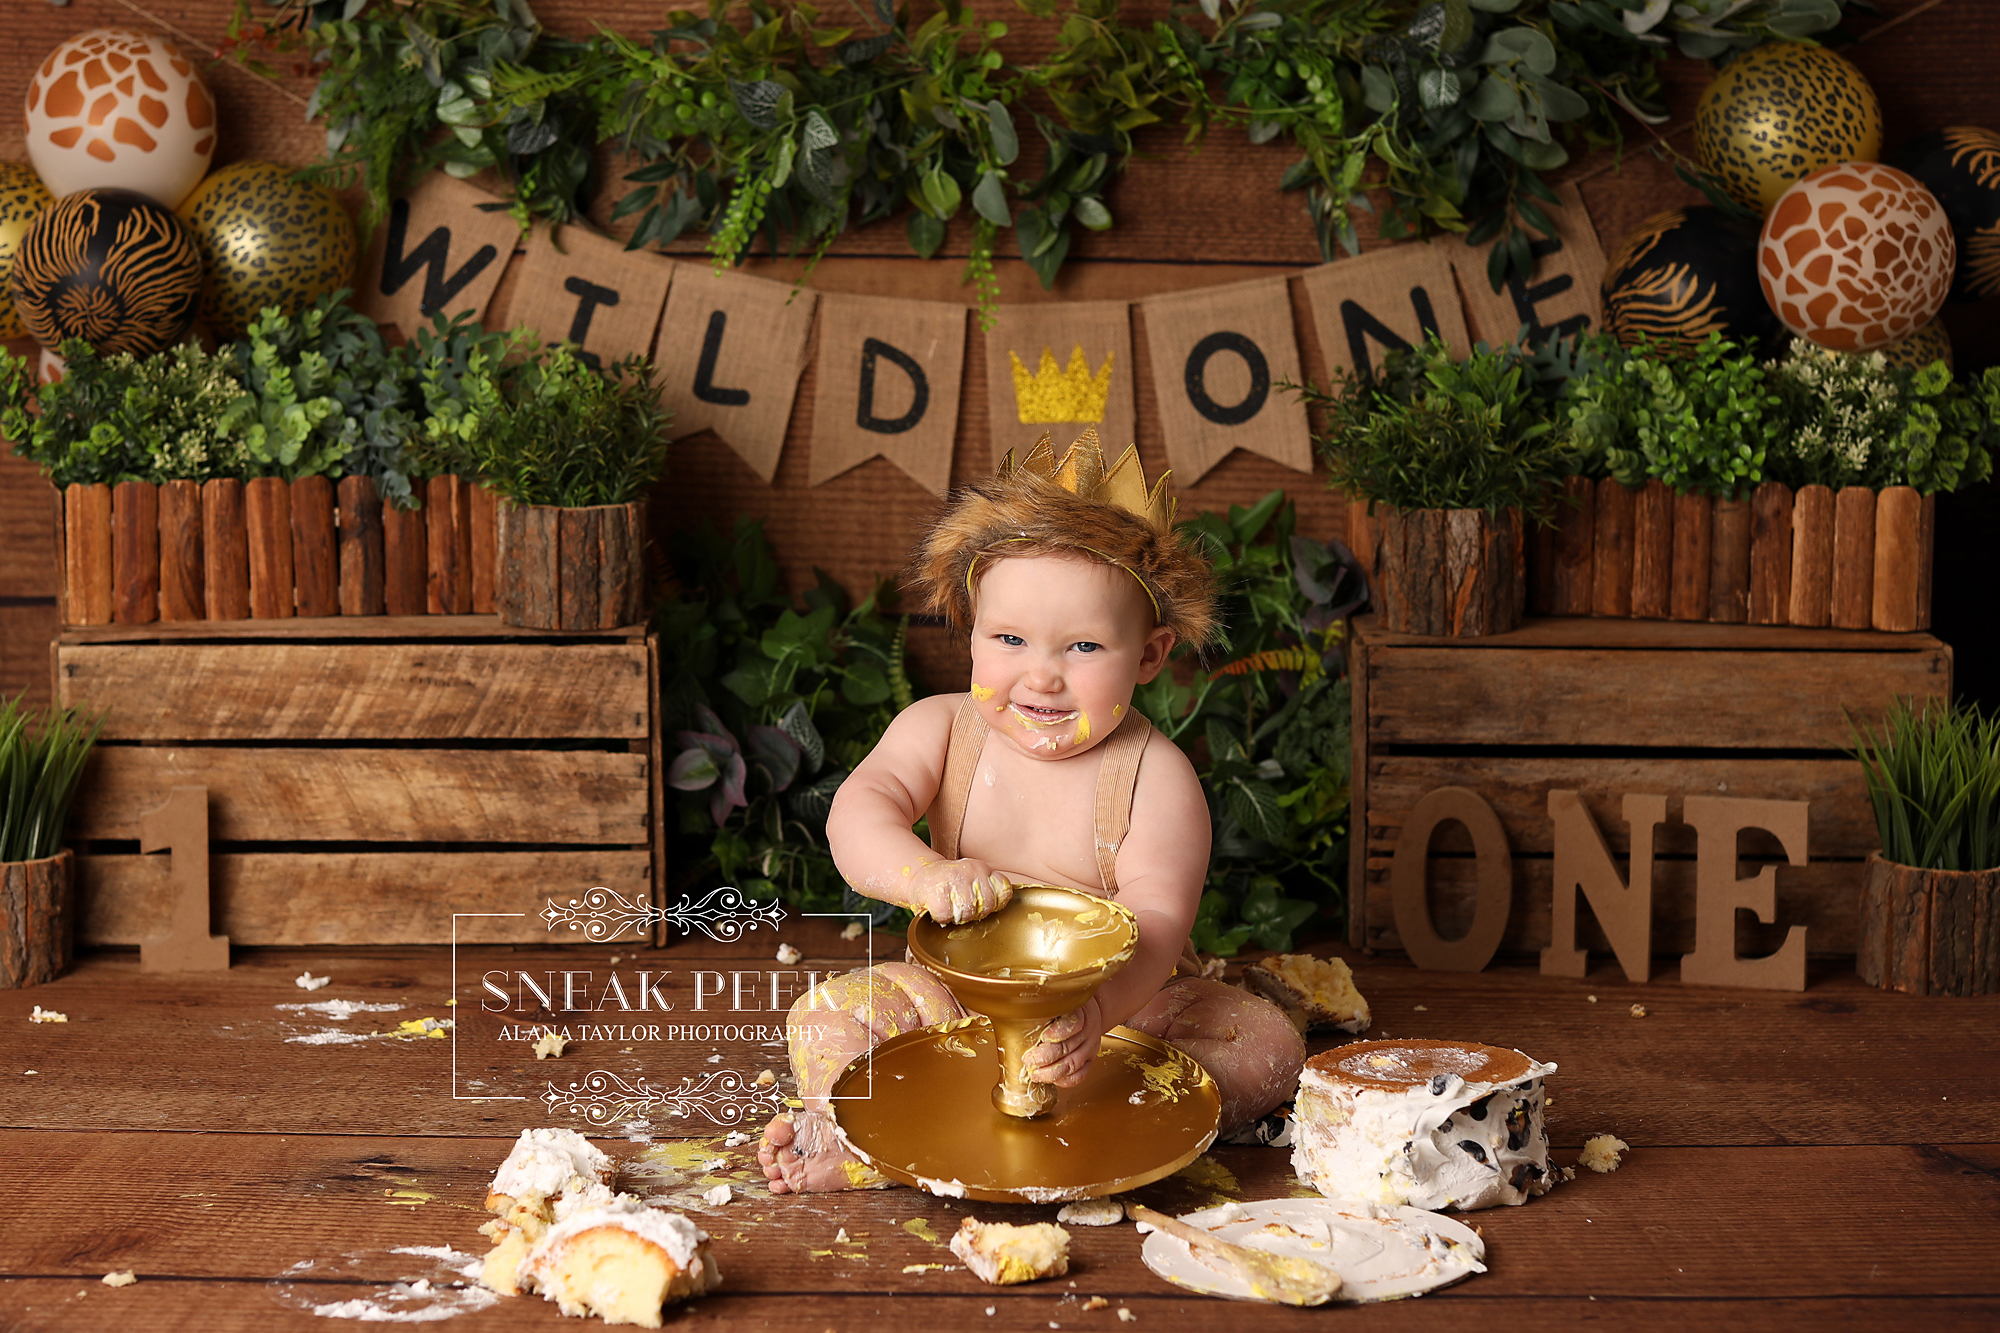 Alana Taylor Photography. 2 Top 10 Best Cake Smash Photographers in the World - 47